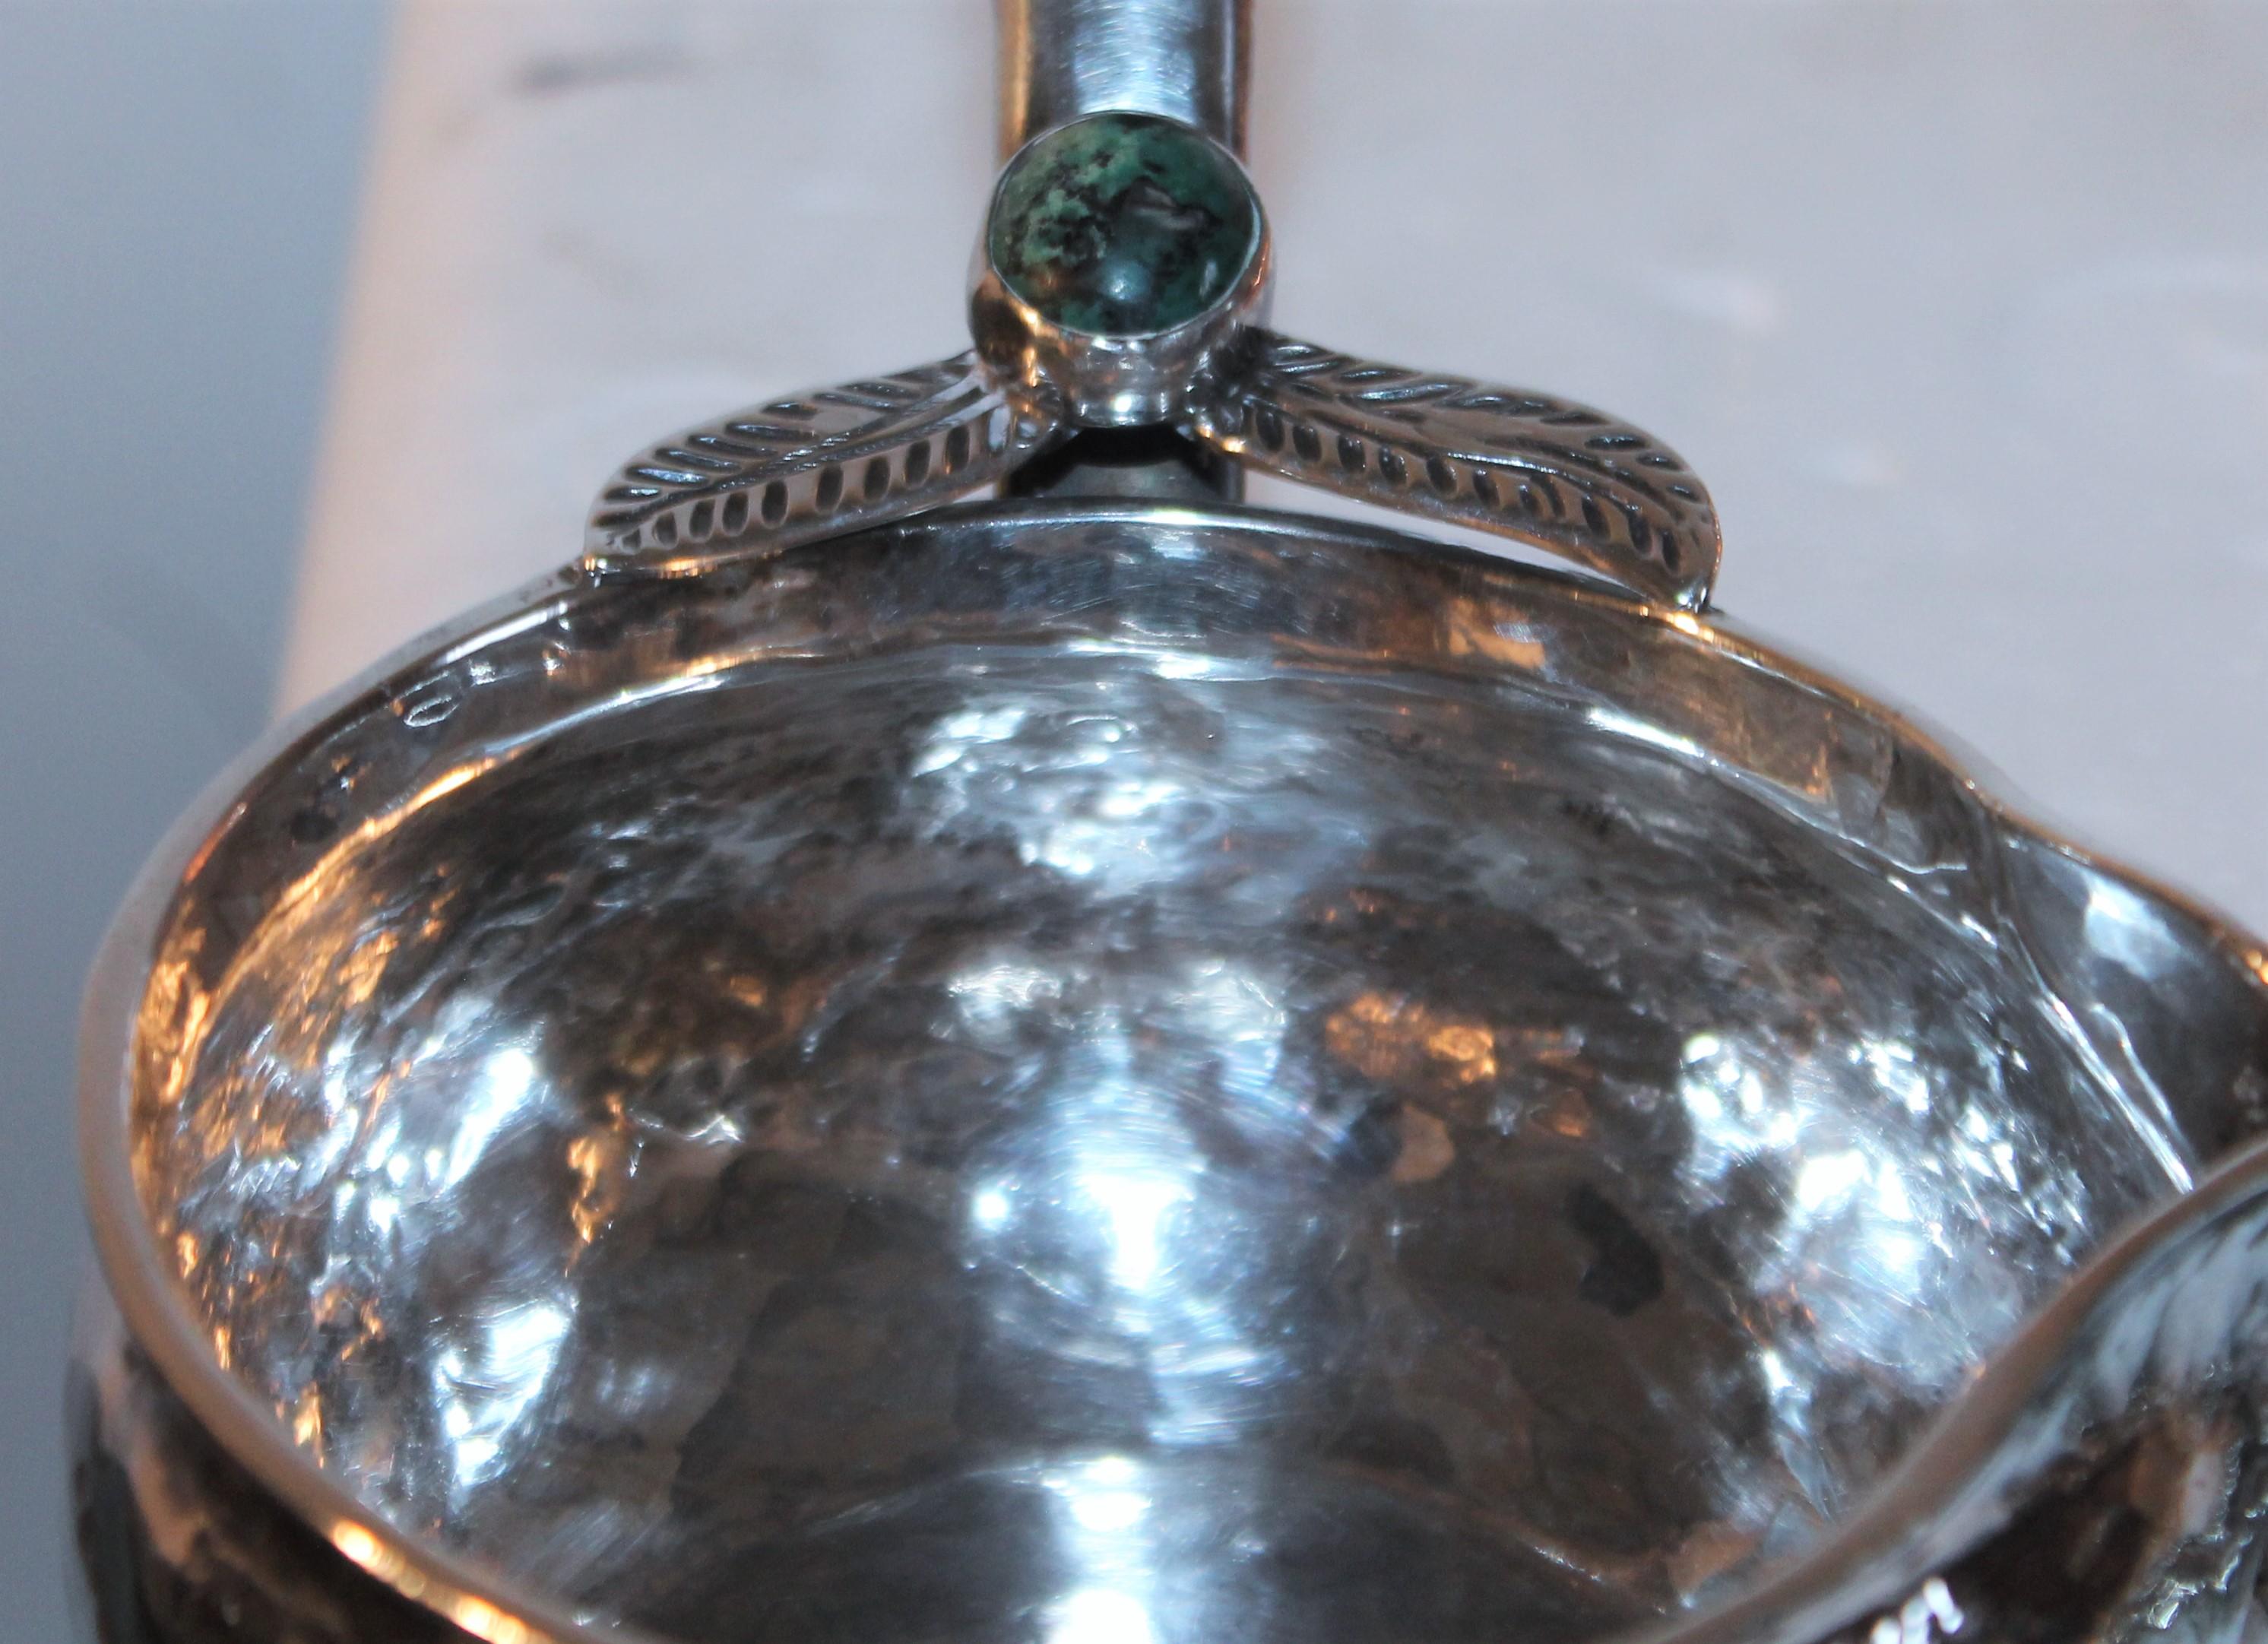 This fantastic sterling silver handmade ladle or dipper has a nugget of turquoise and a hand carved teak handle. The condition is fantastic. Such great workmanship. Marked 925 & Peru.